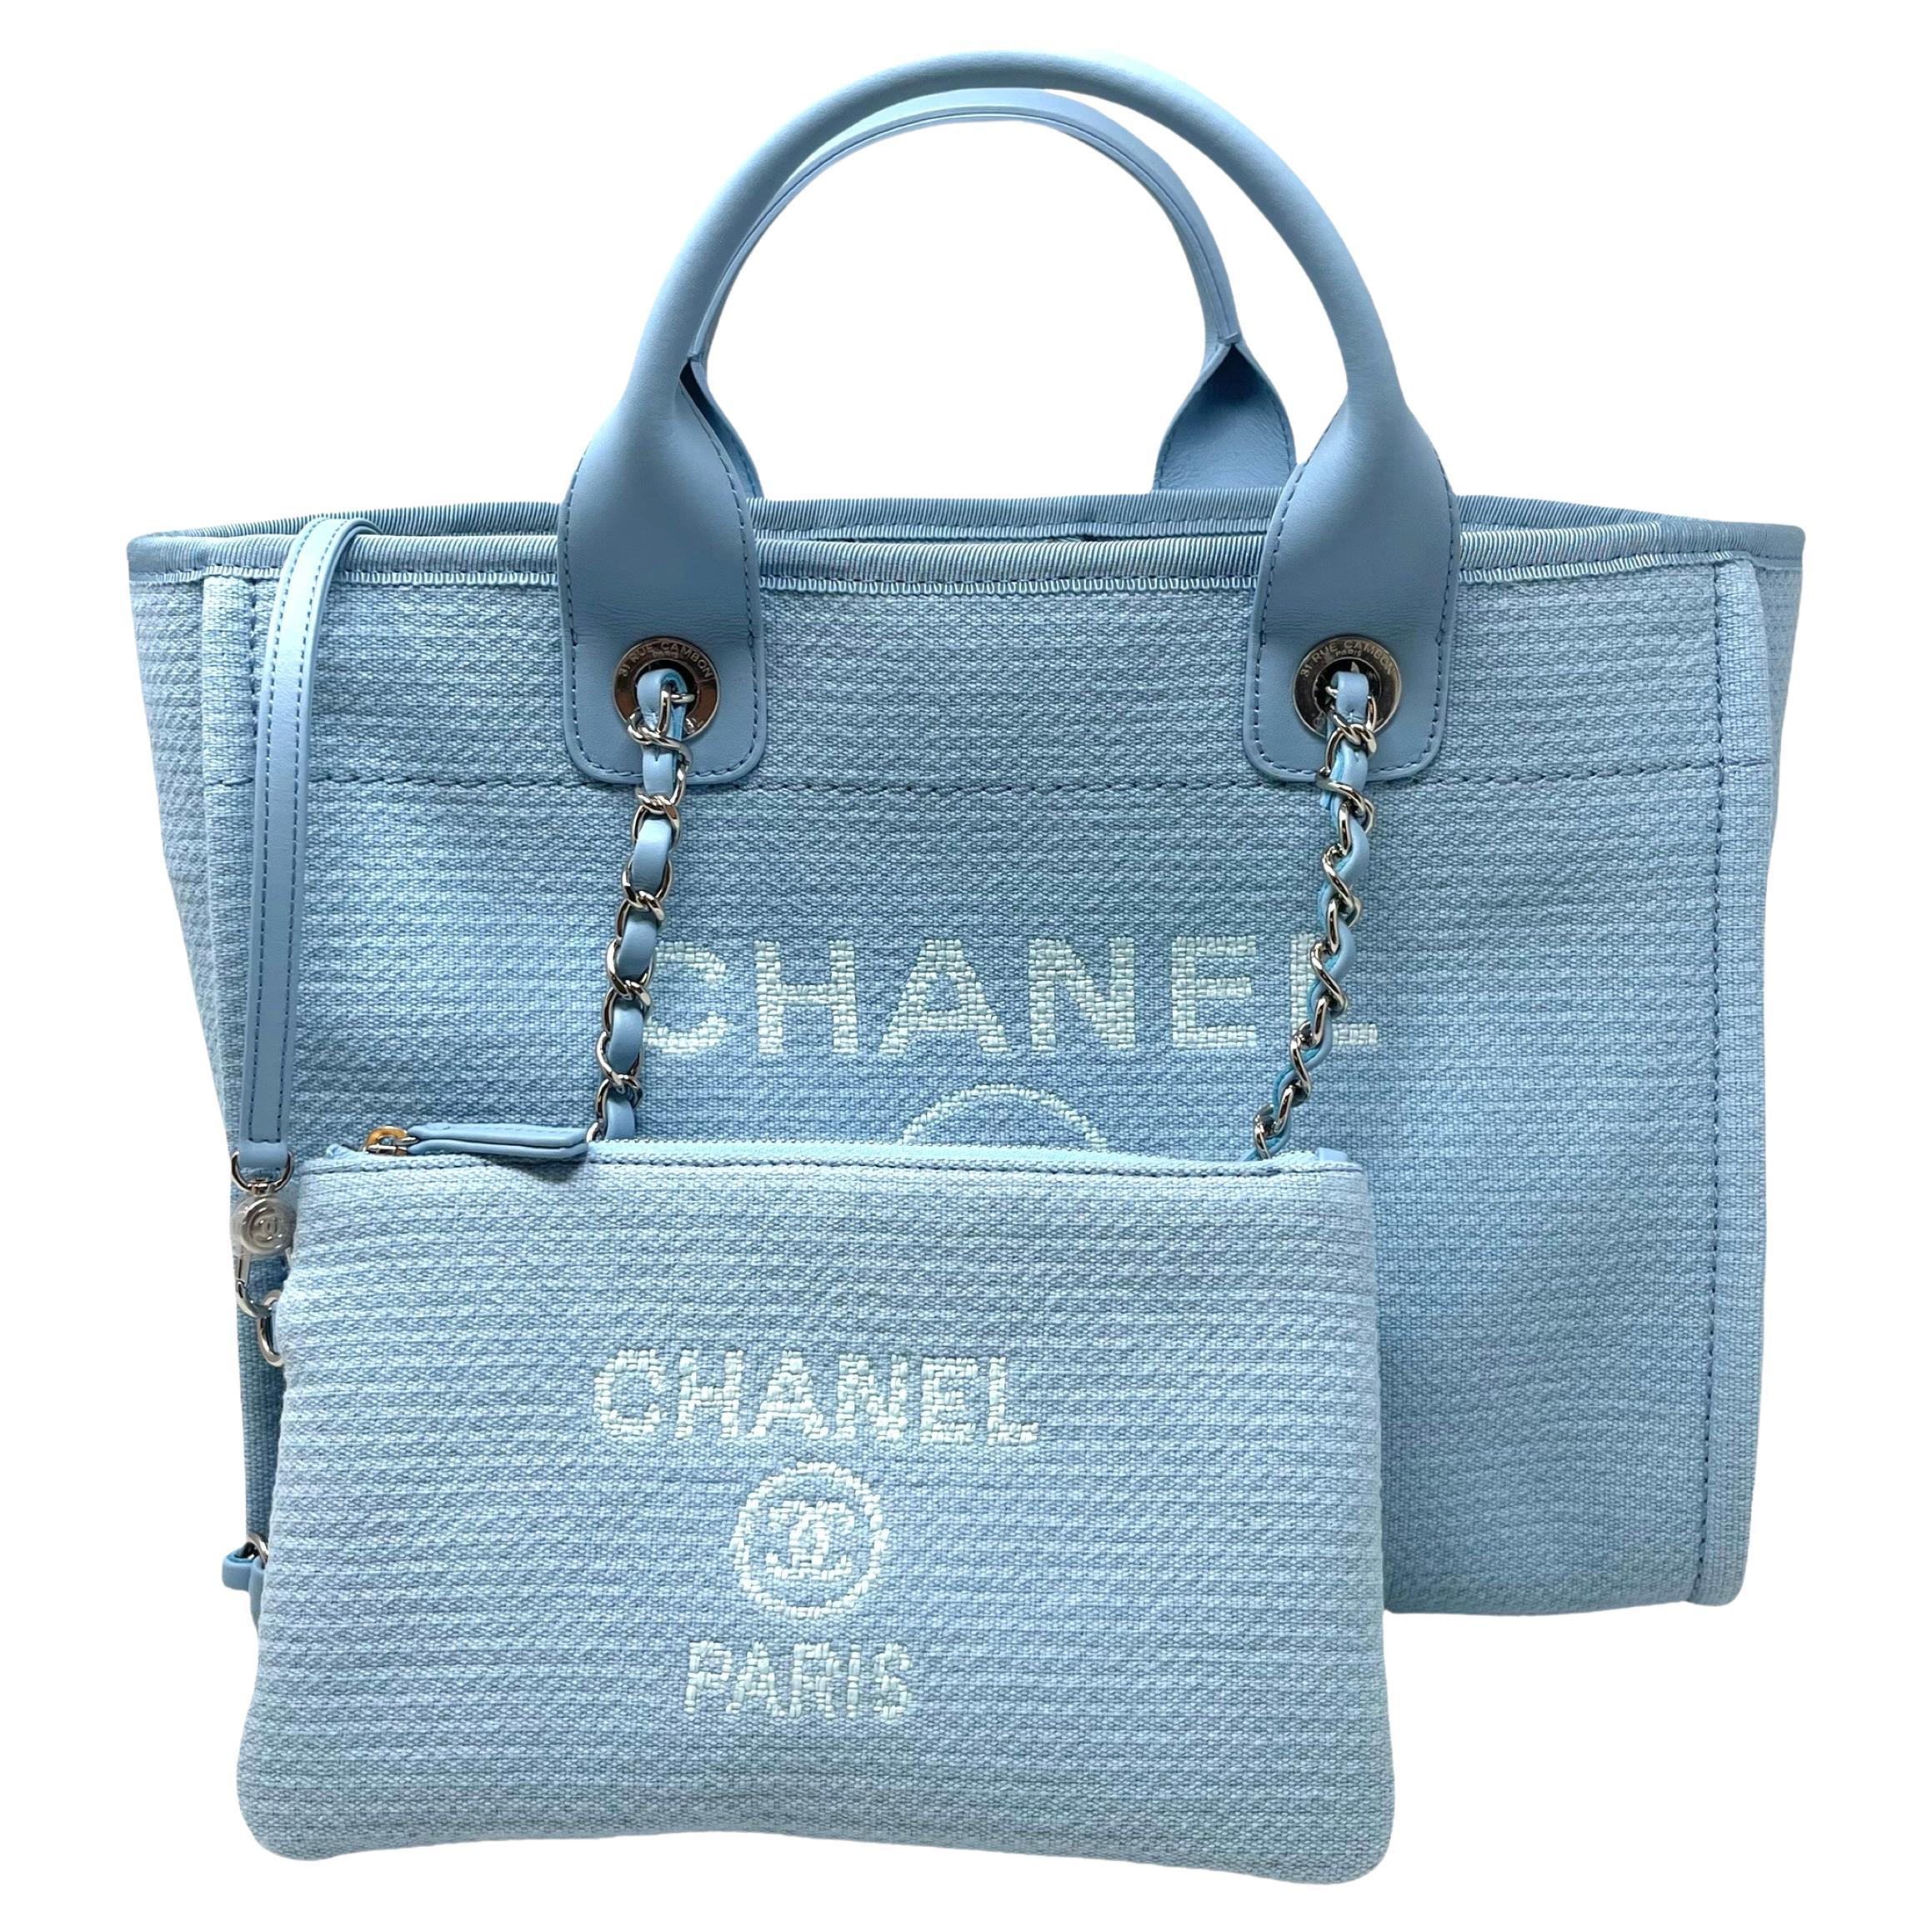 NEW Chanel Small Deauville Shopping Bag Blue Boucle Silver Hardware Tote Bag